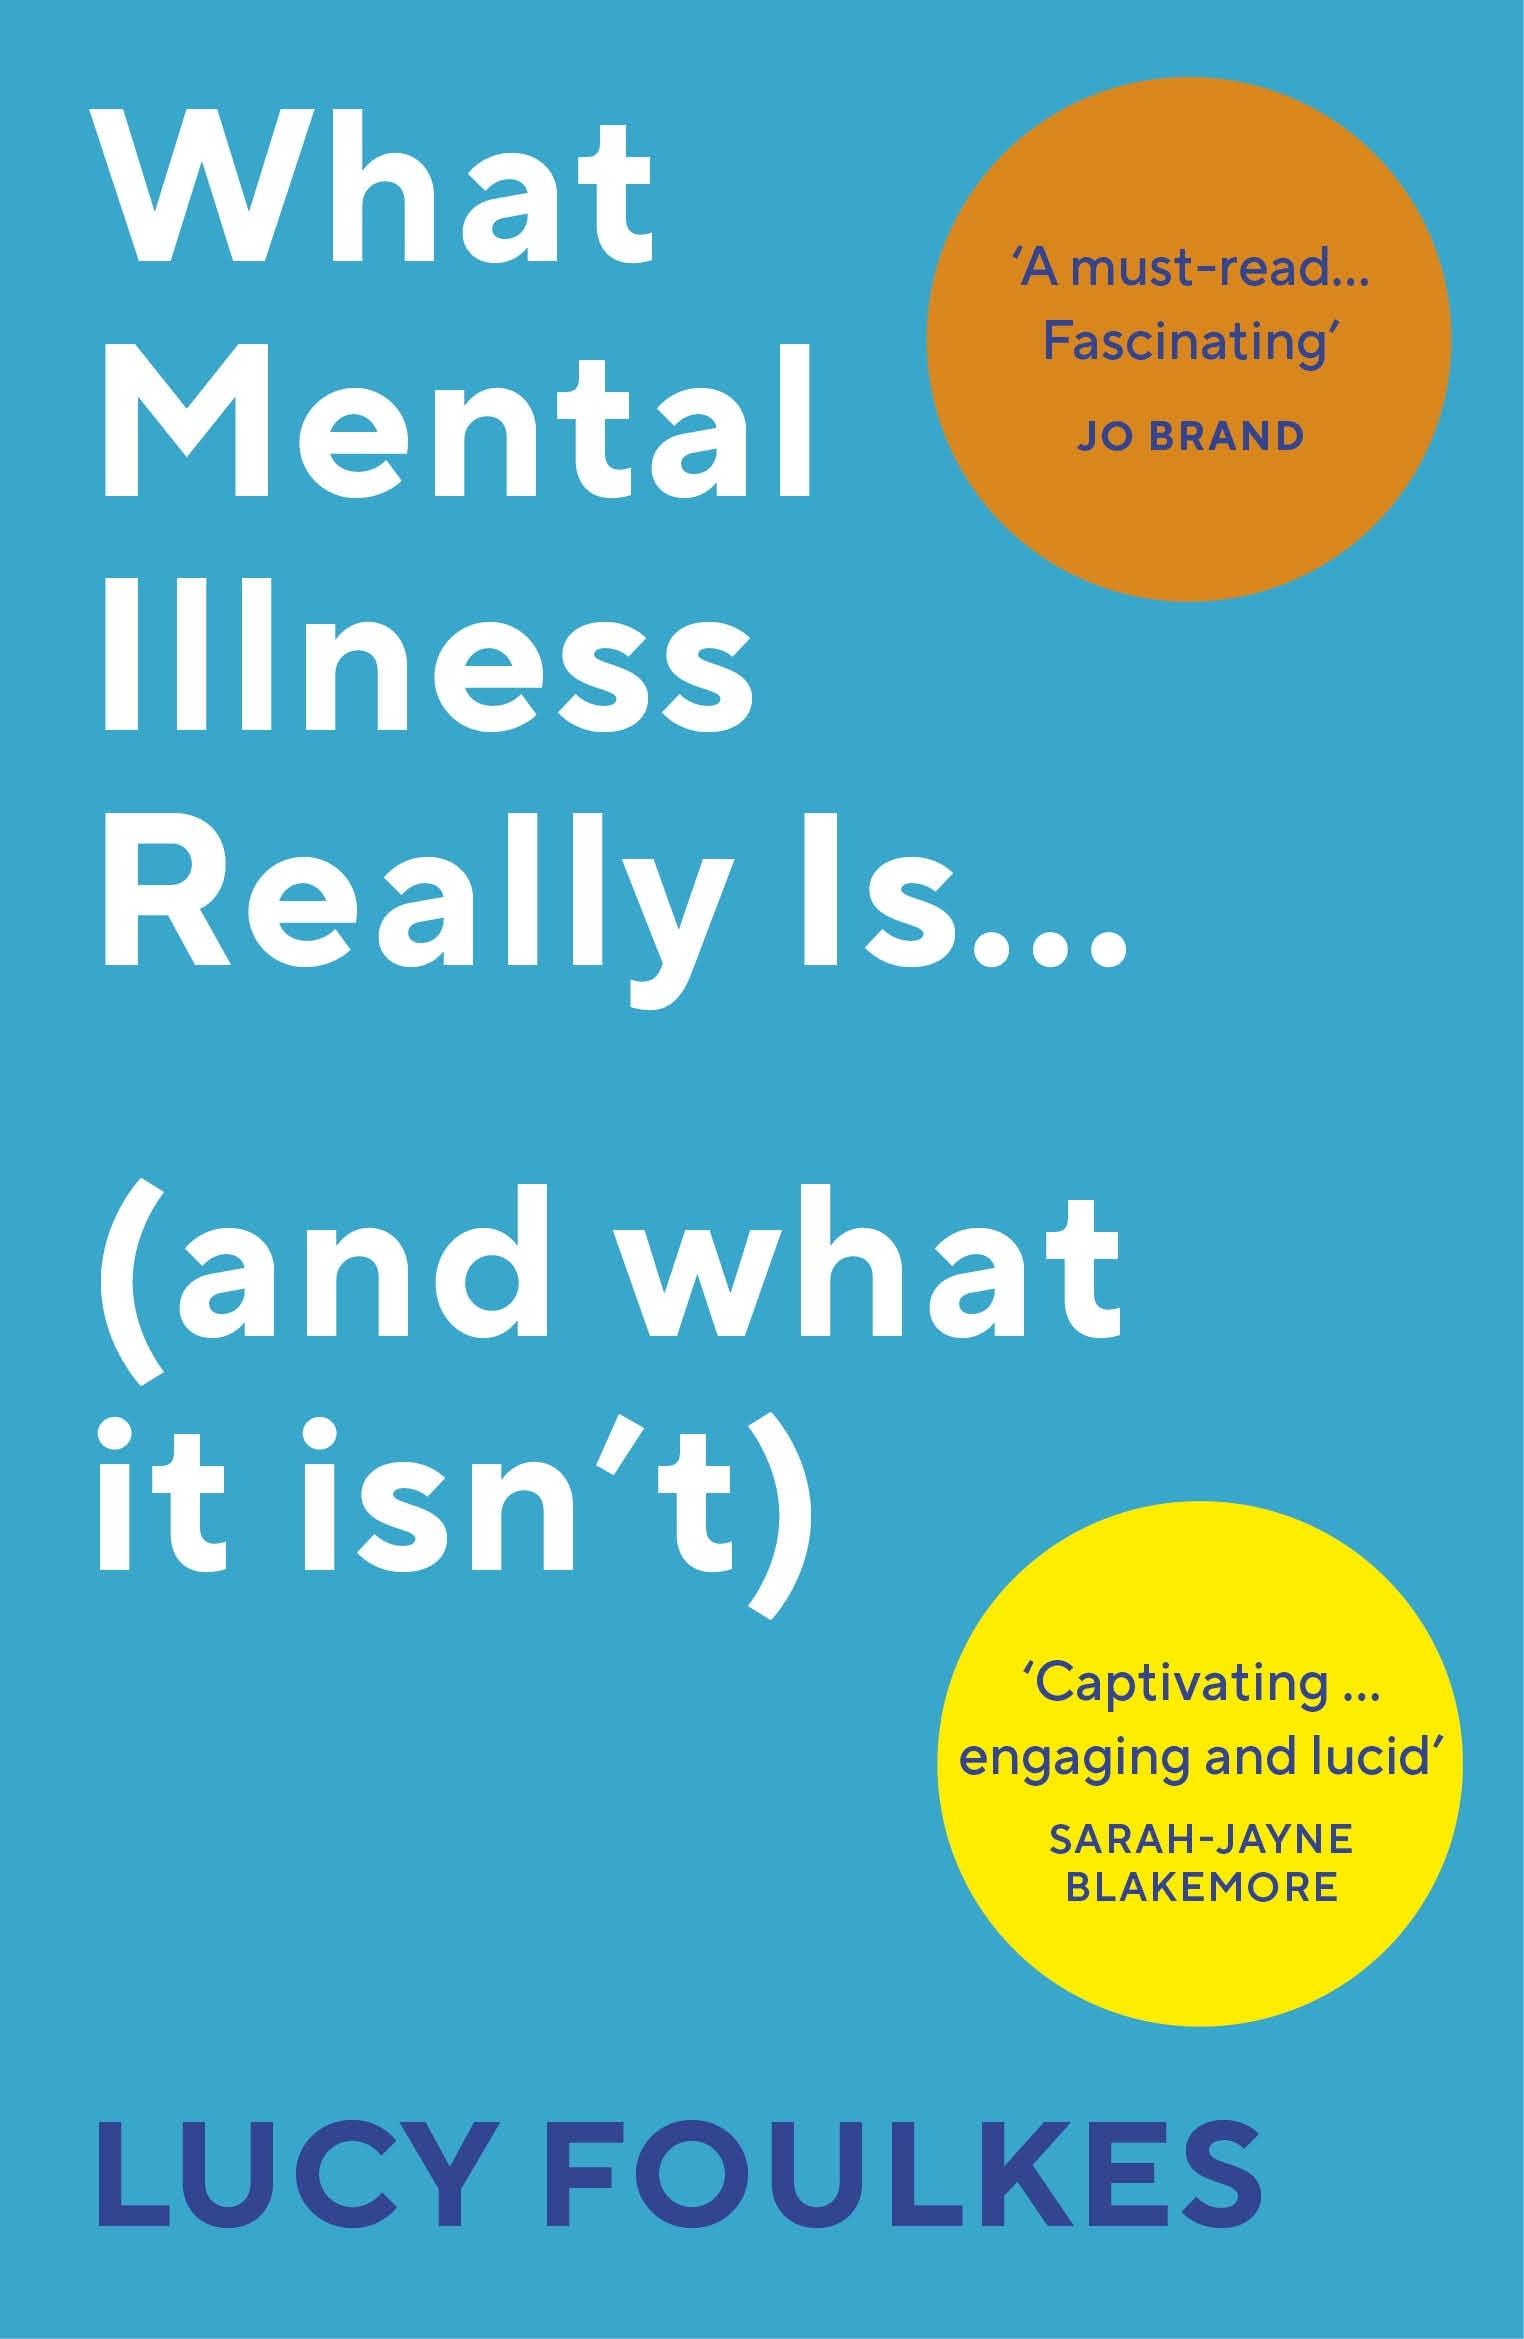 Book “What Mental Illness Really Is… (and what it isn’t)” by Lucy Foulkes — April 7, 2022